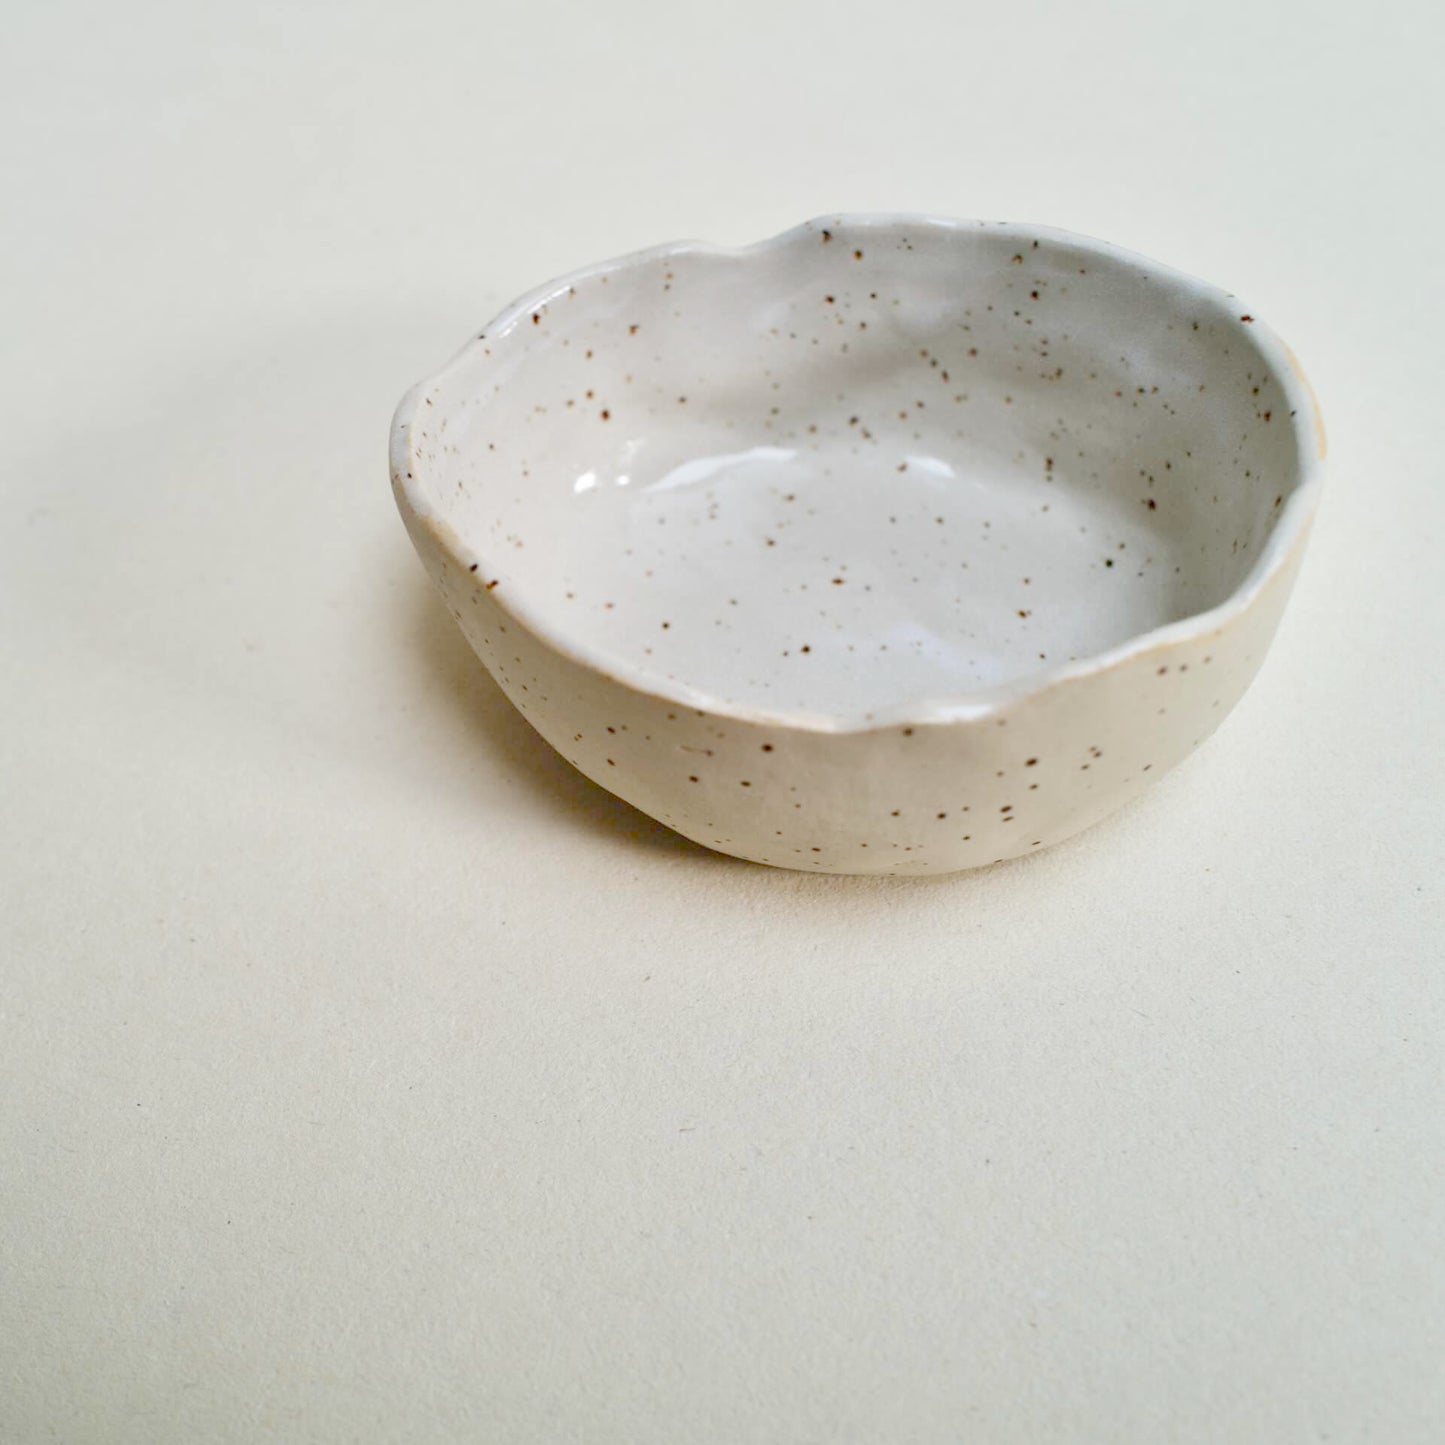 Speckled organic shaped bowl